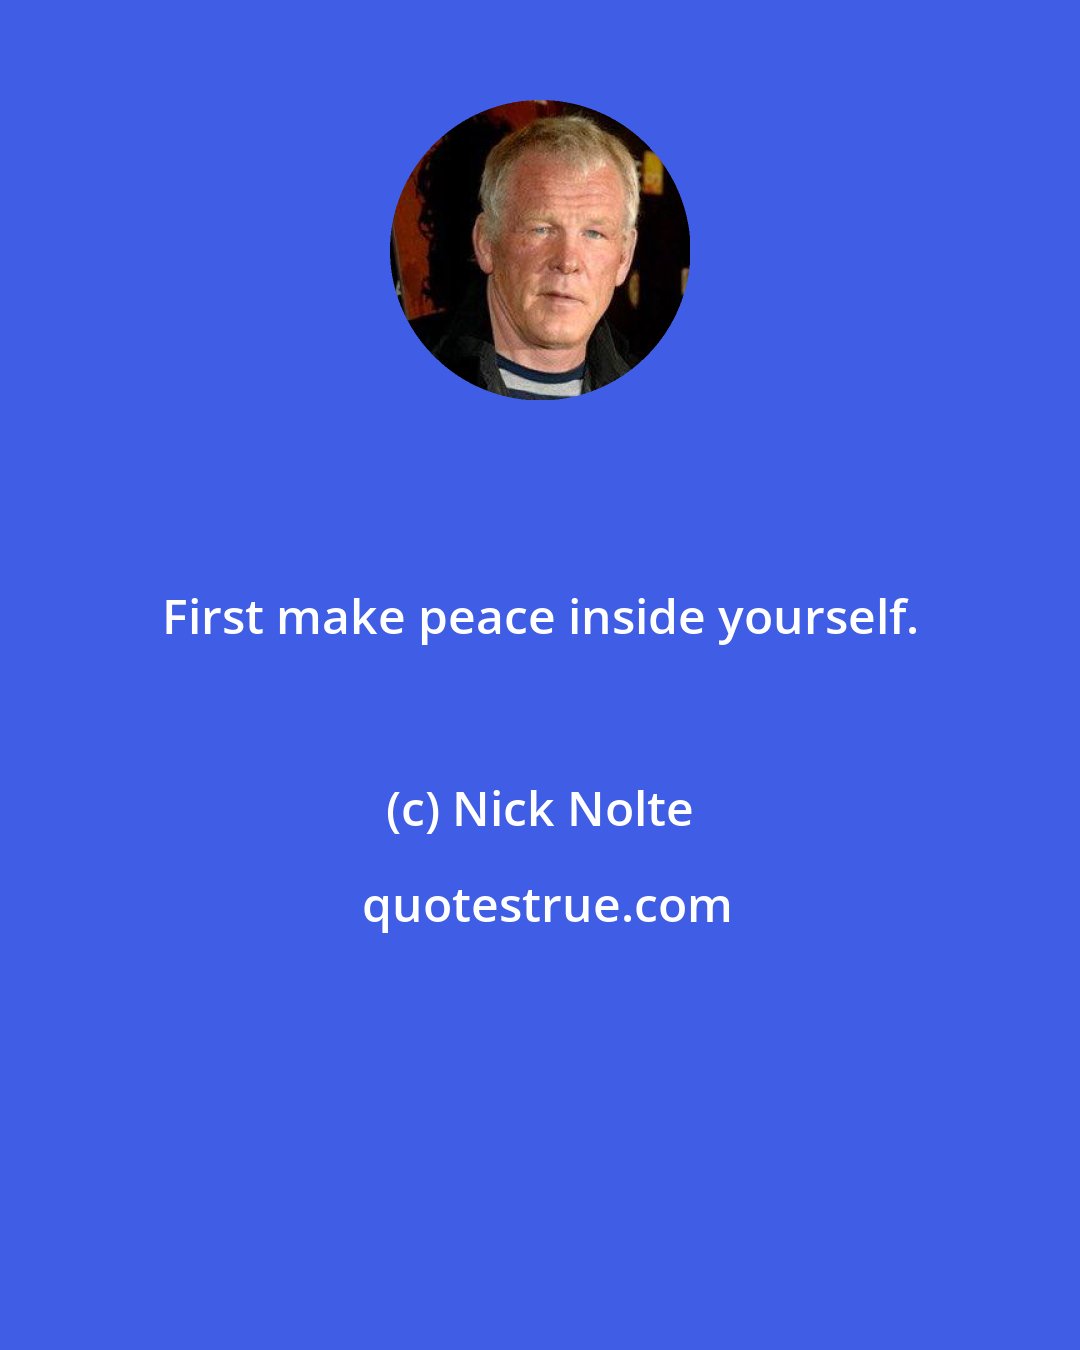 Nick Nolte: First make peace inside yourself.